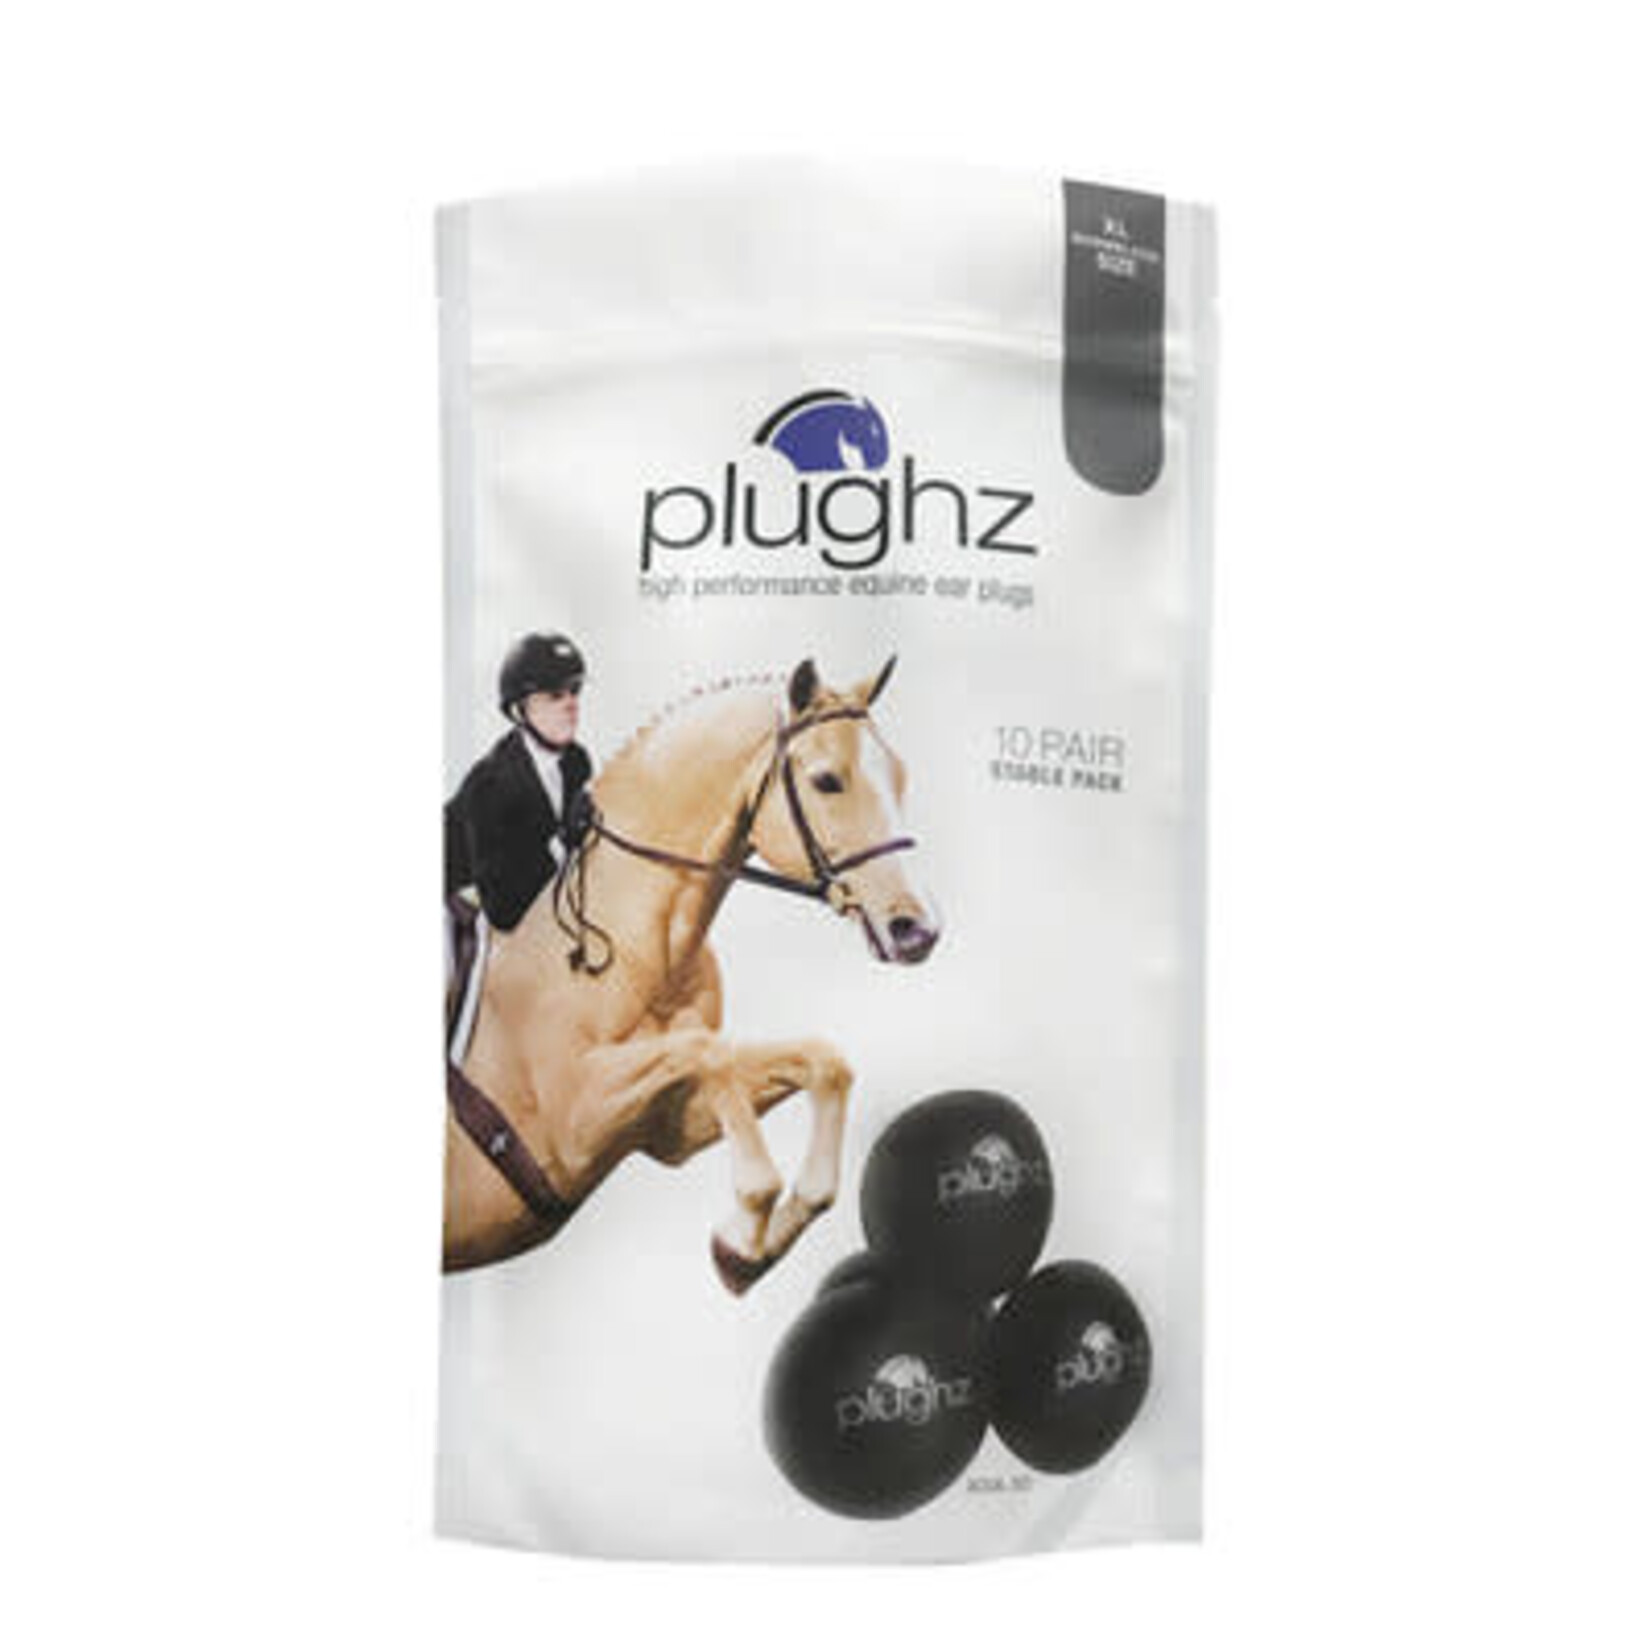 Plughz Plughz Stable Pack, 10 Pairs